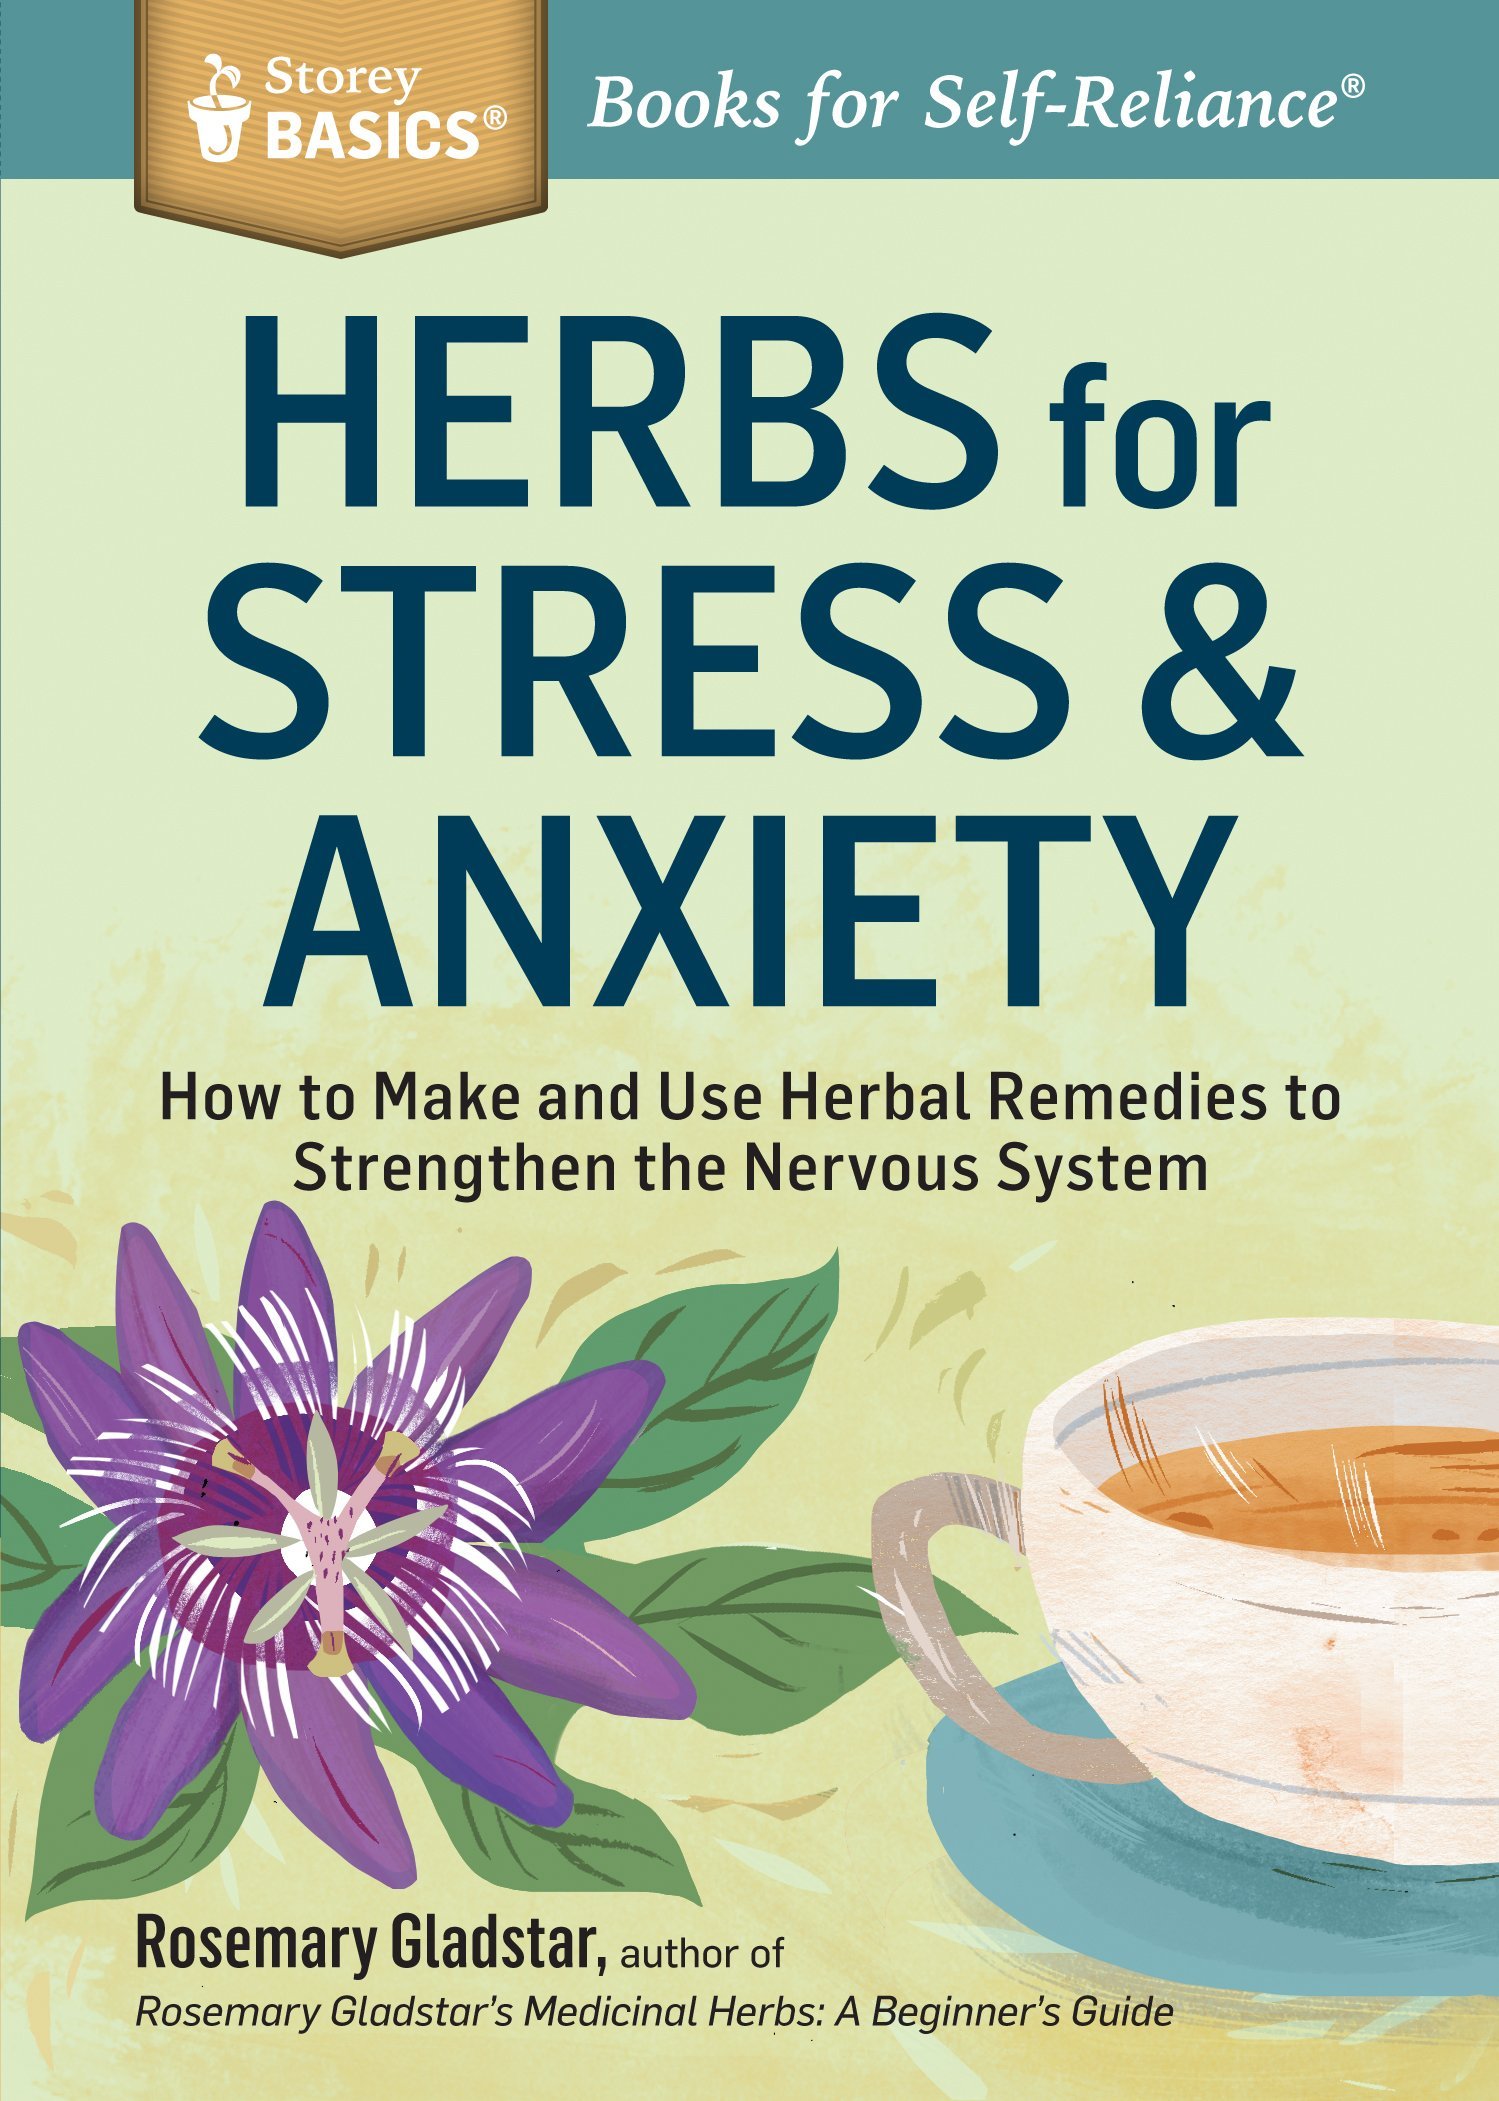 herbs for stress & anxiety | the science and art of herbalism